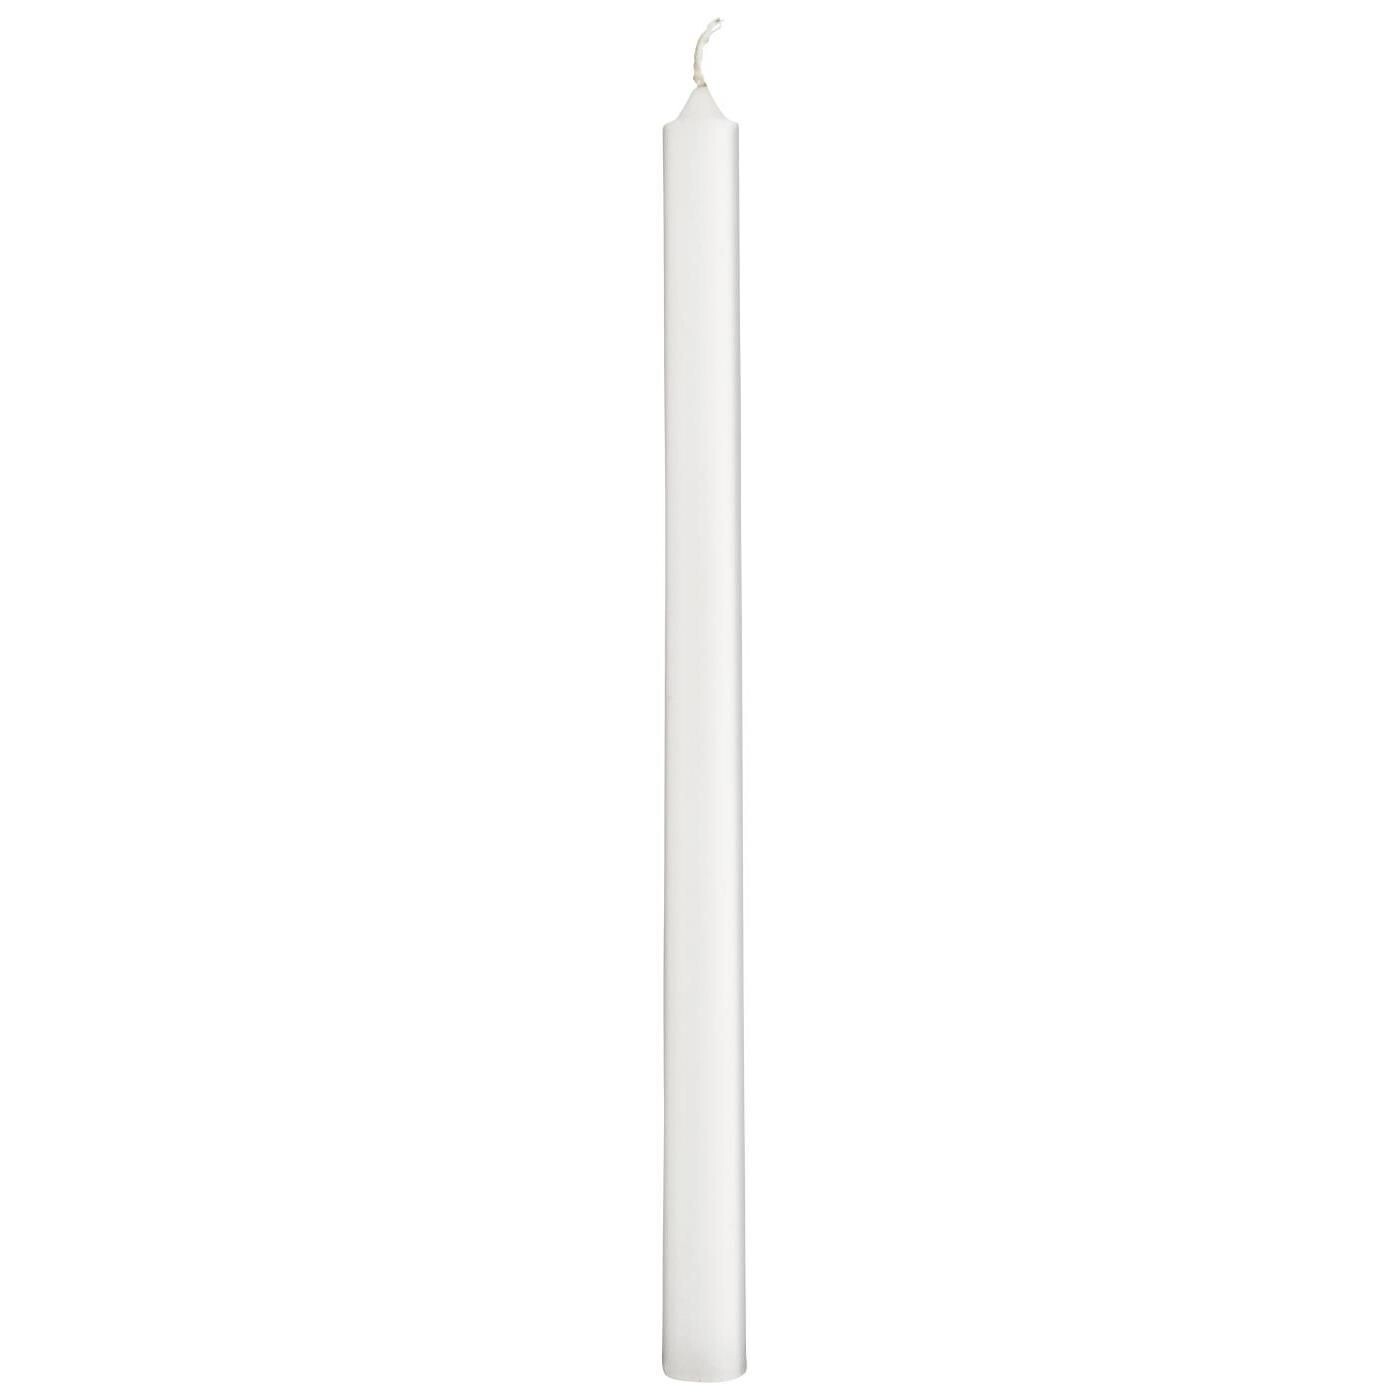 4 TALL TAPER CANDLES - WHITE